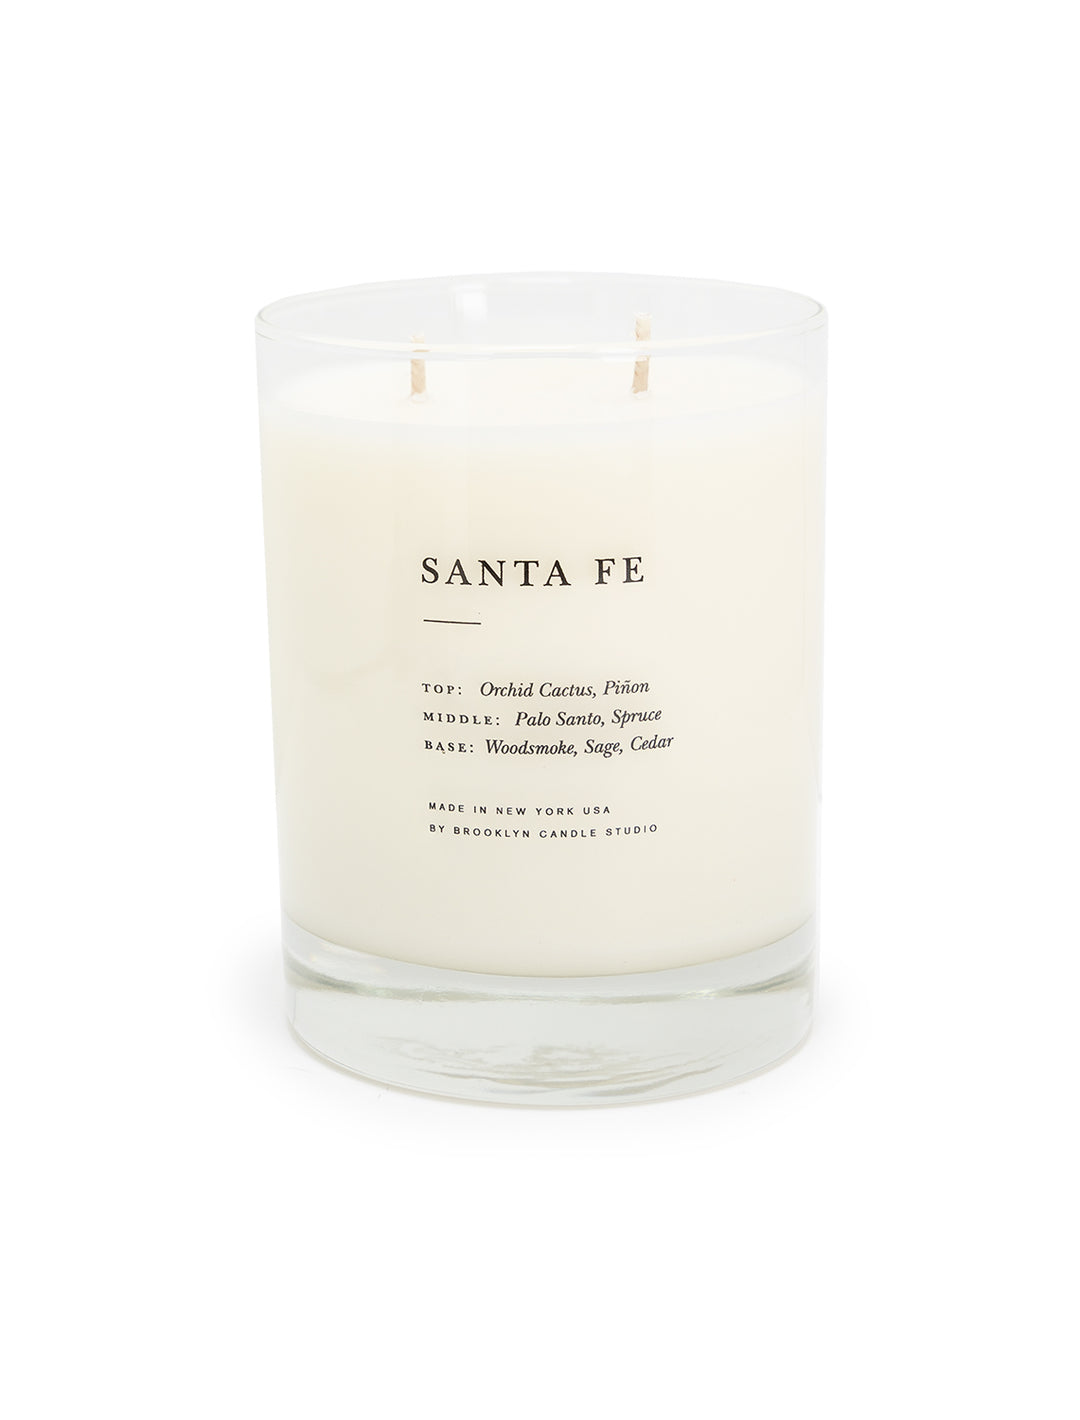 Front view of Brooklyn Candle Studio's ESCAPIST santa fe candle.